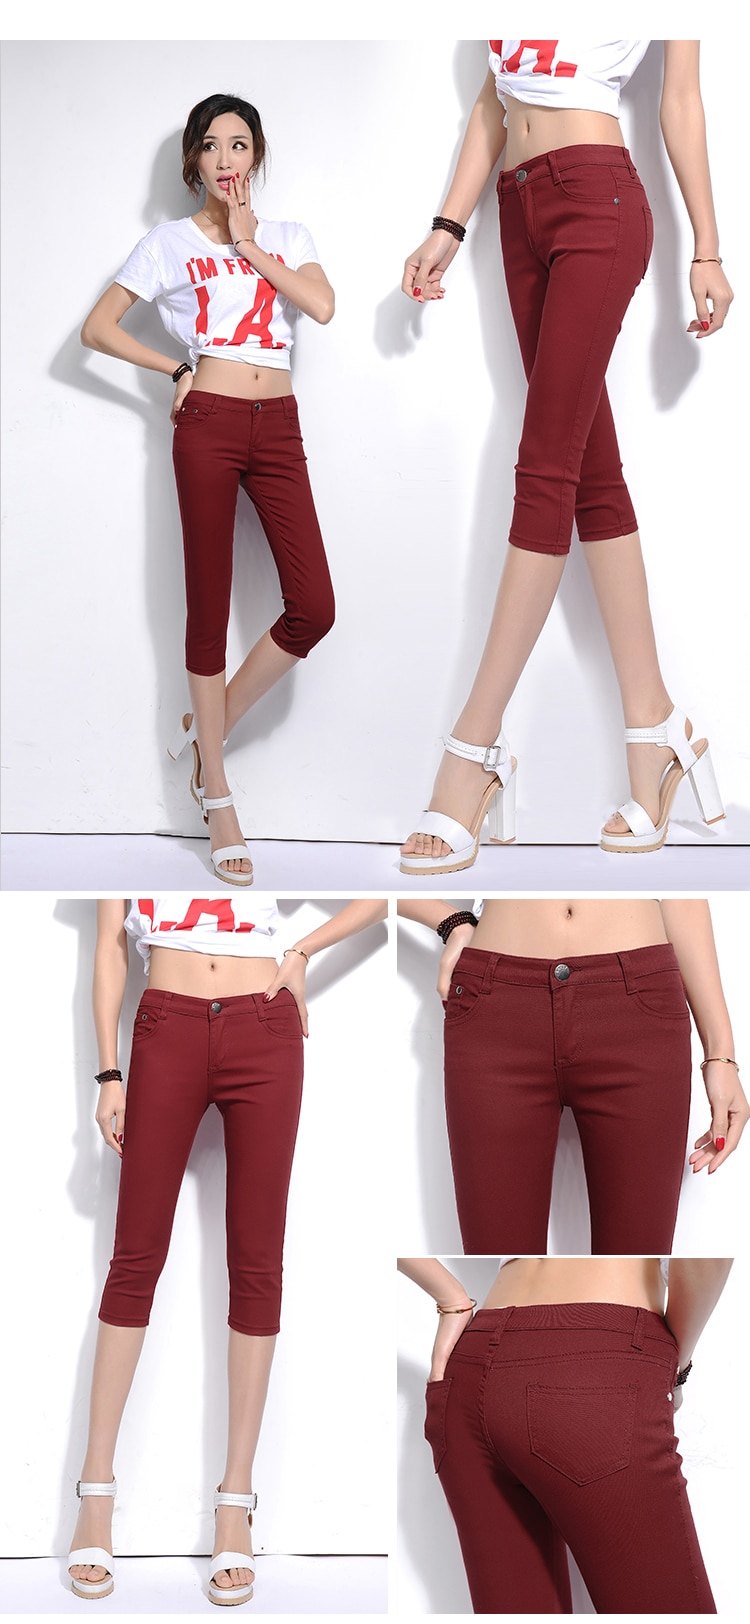 2018 New Spring Leisure Stretch Candy Color Cropped pants Female pencil pants Thin section Trousers Female feet Breeches (21)